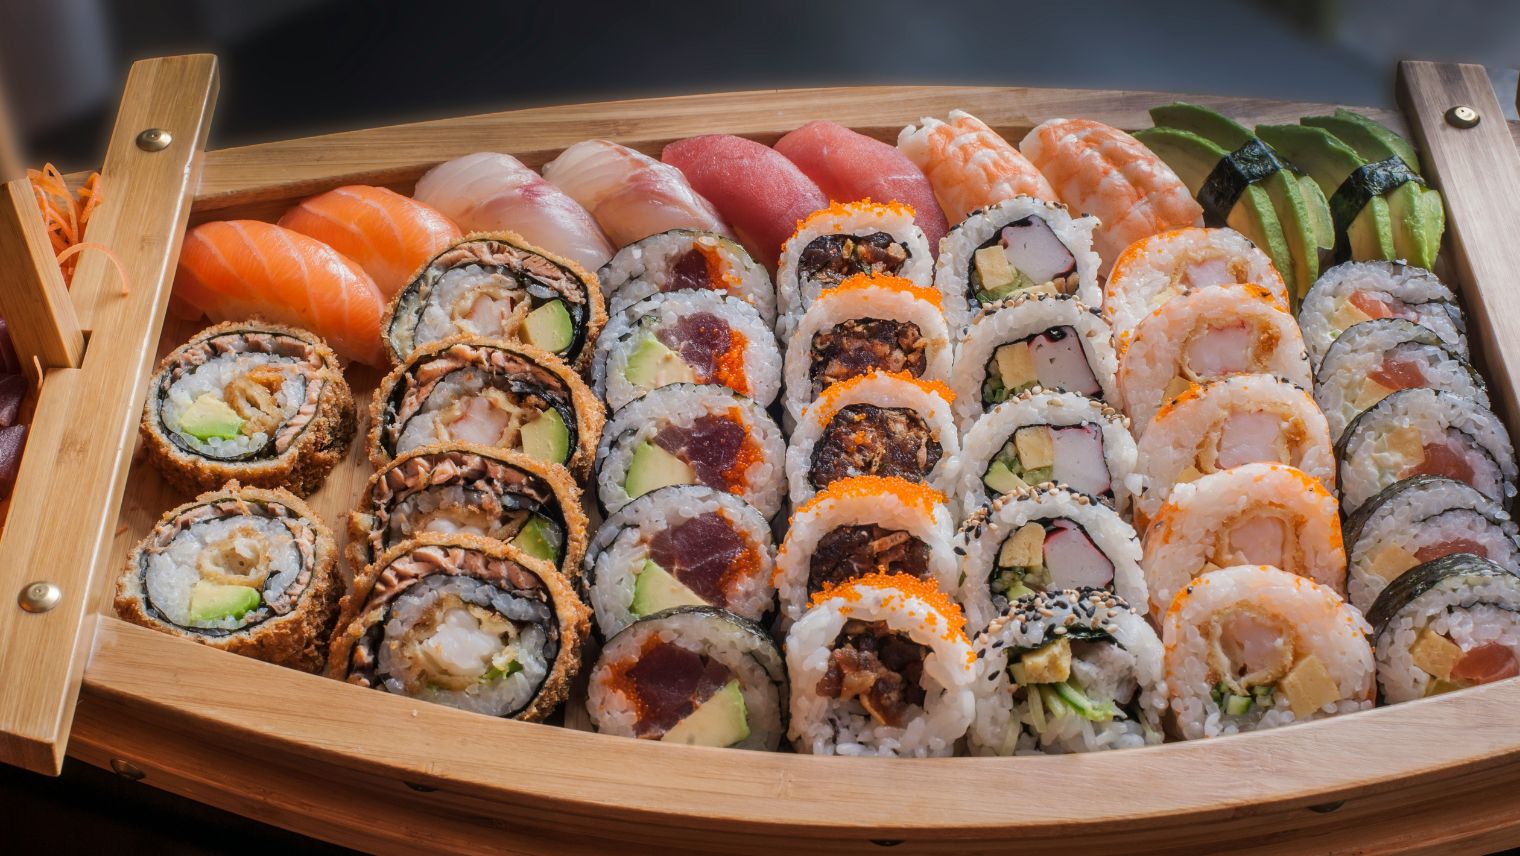 A plate filled with different types of sushi